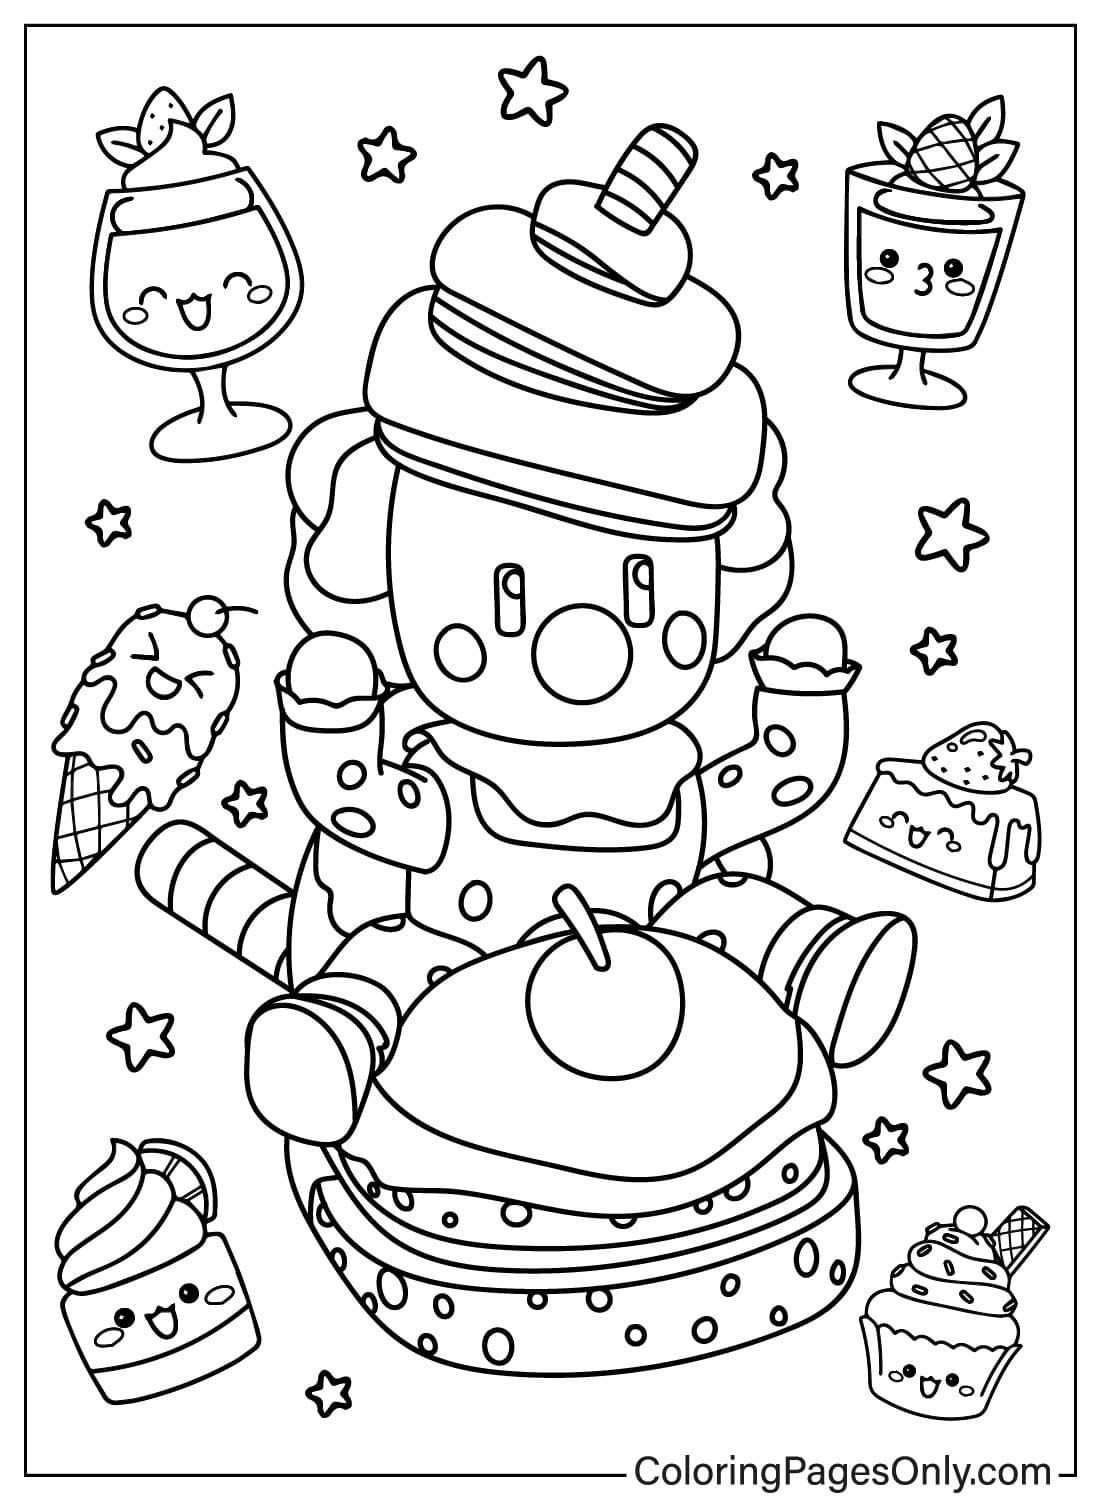 Stumble Guys Coloring Page Printable from Stumble Guys